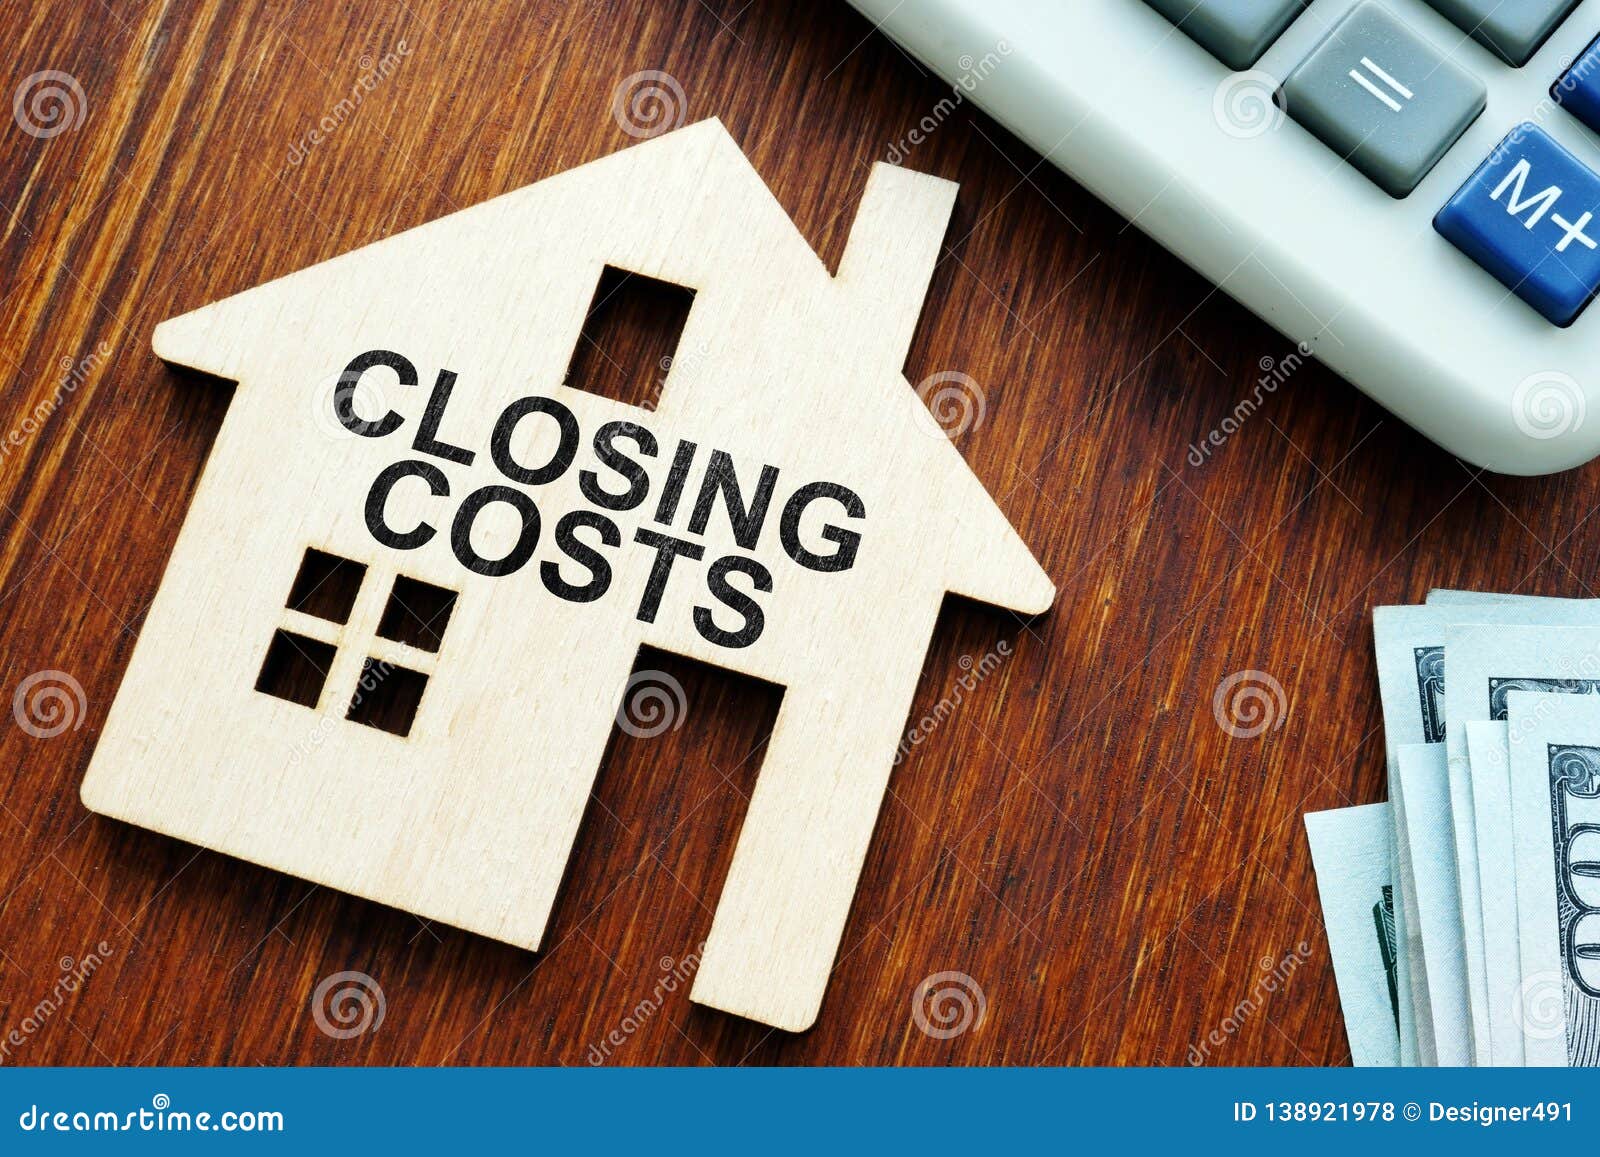 closing costs. model of house and money